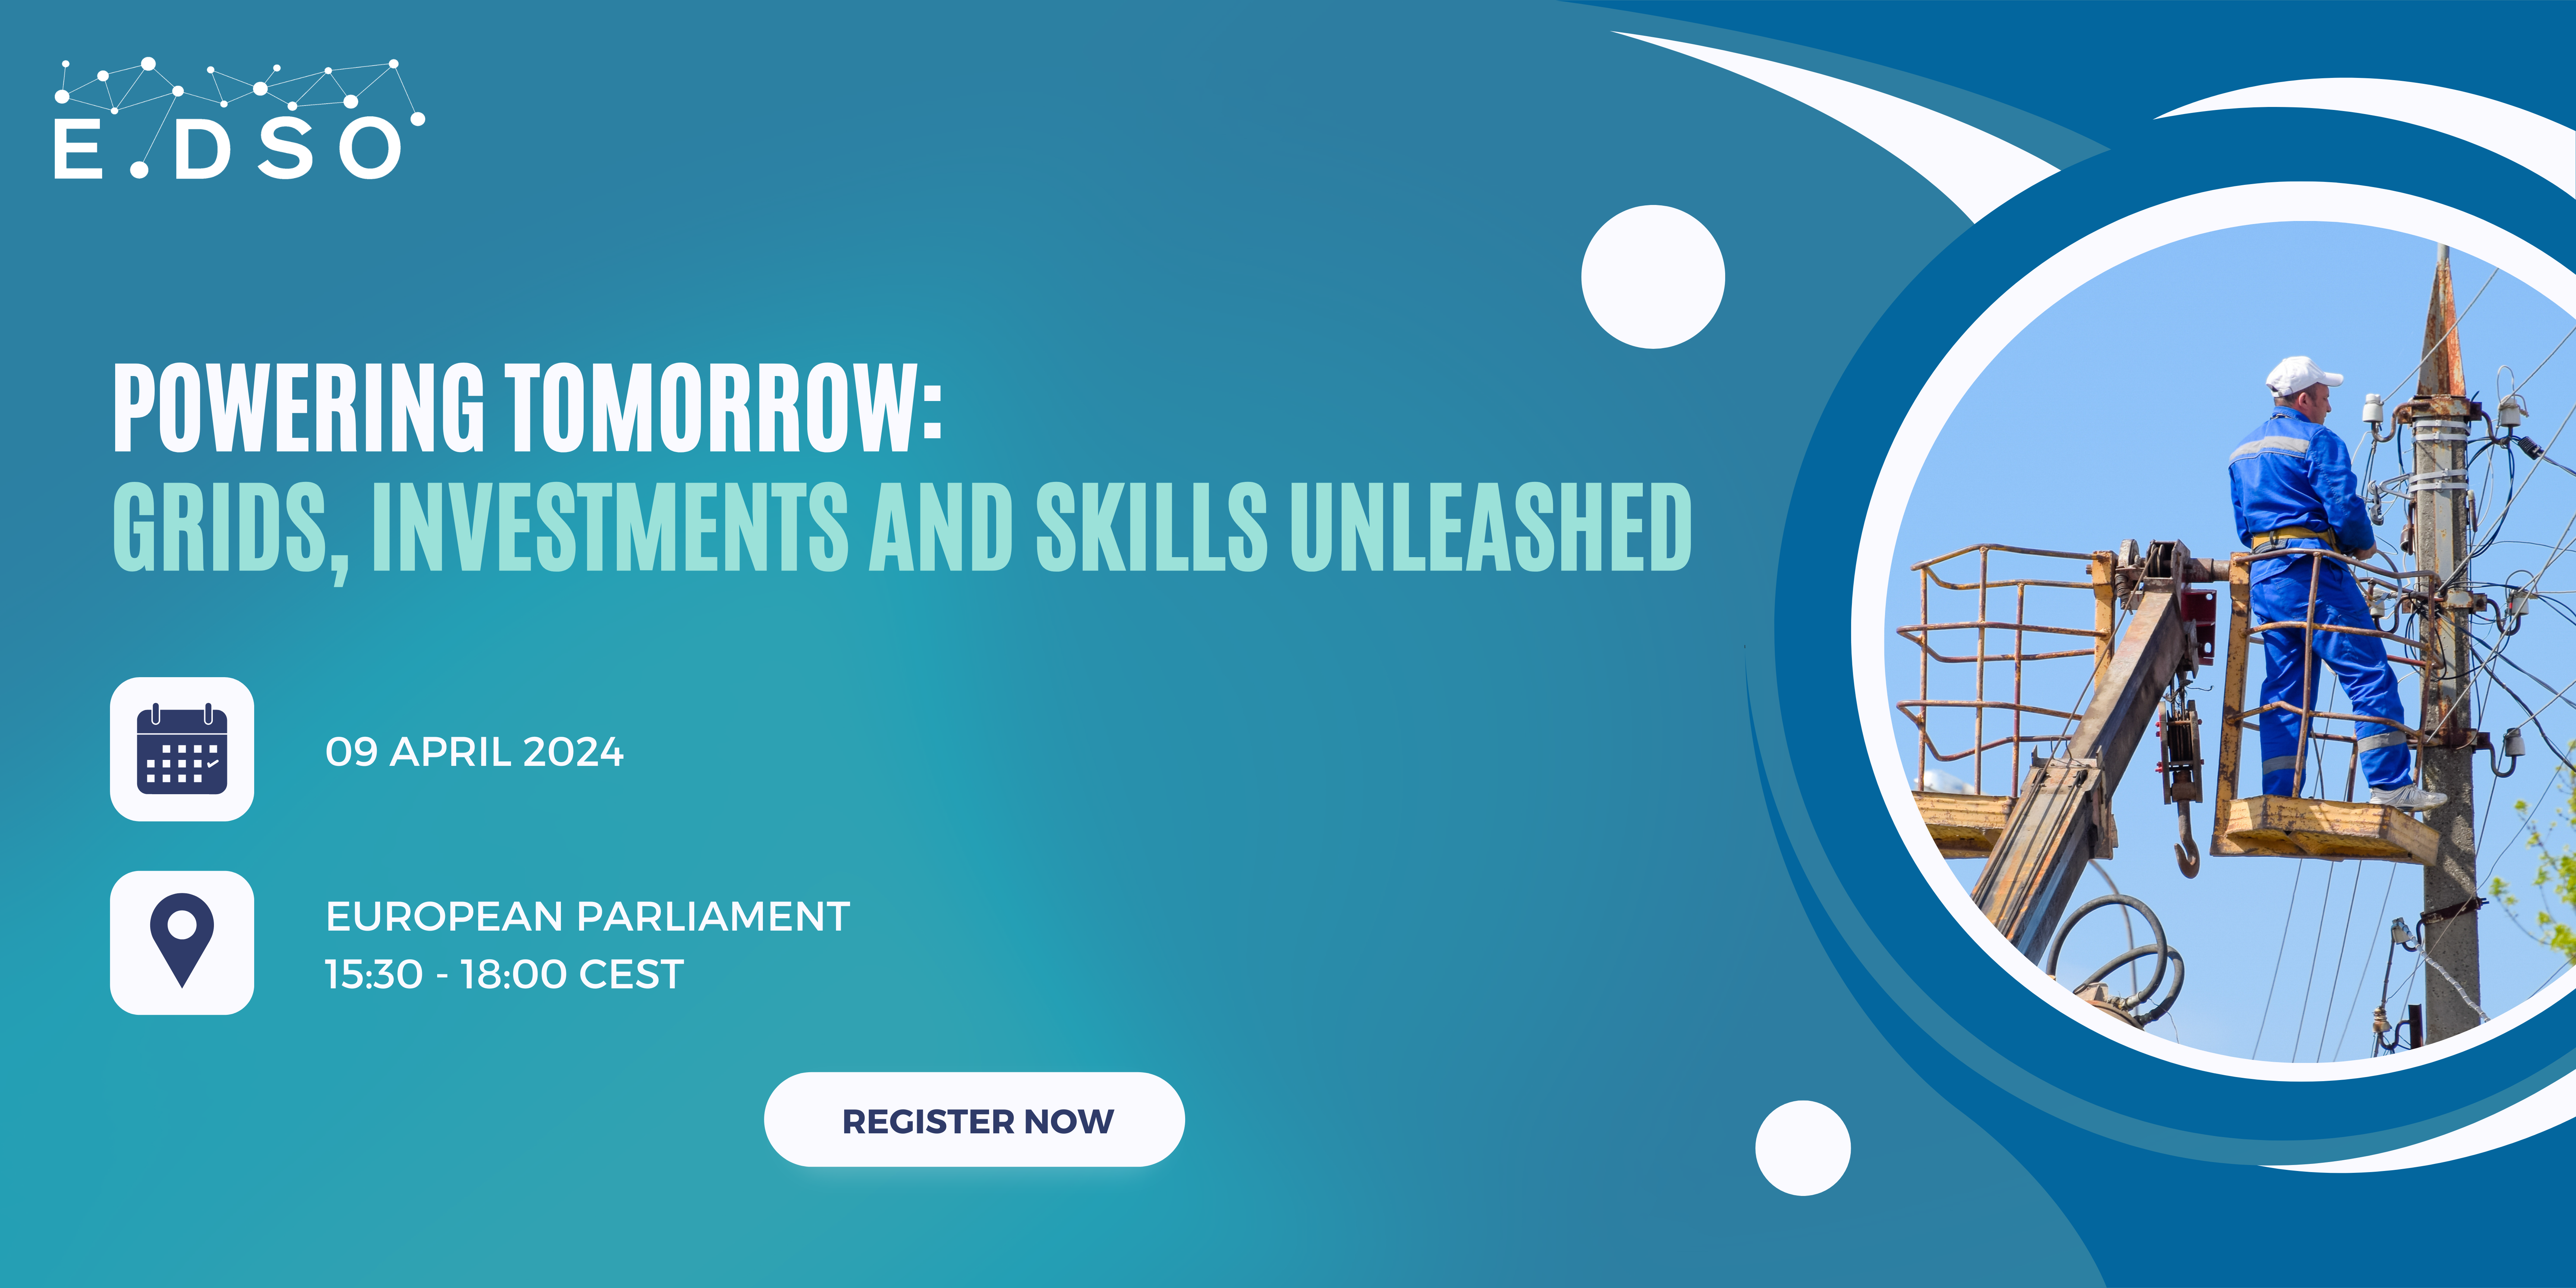 "Powering Tomorrow: Grids, Investments, and Skills Unleashed"